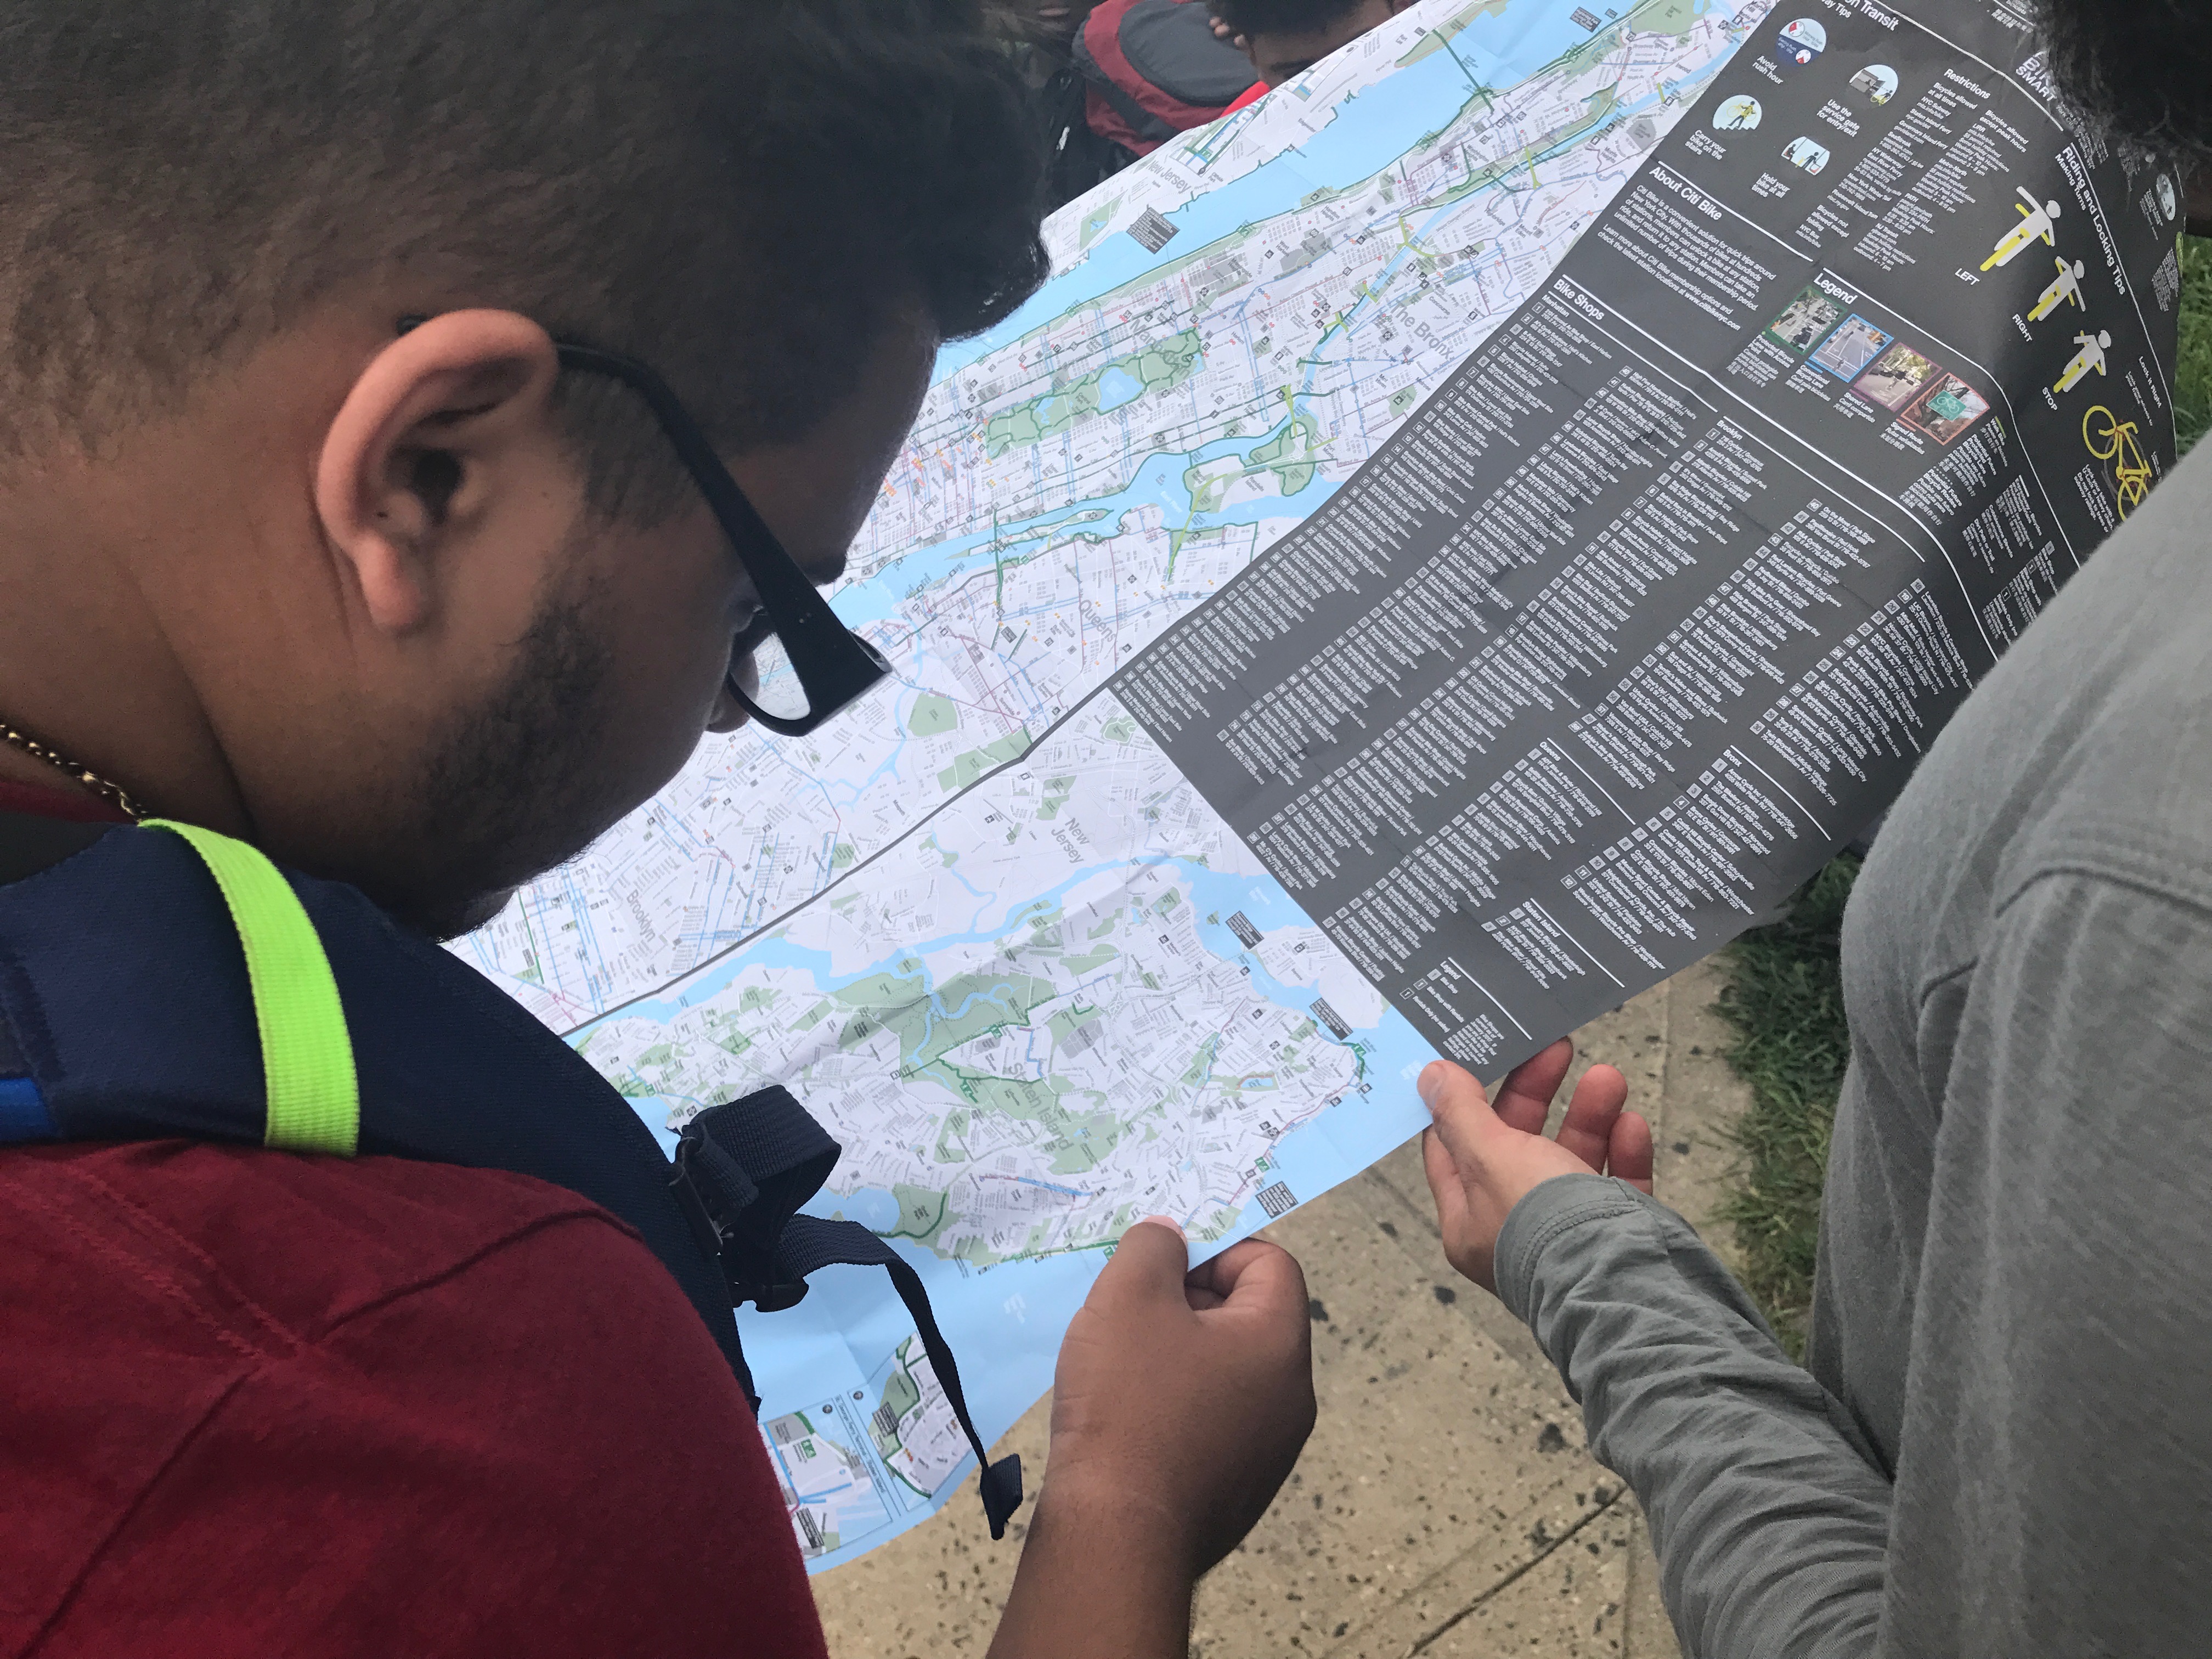 NYC ICO participant studies a map on their urban backpacking trip.